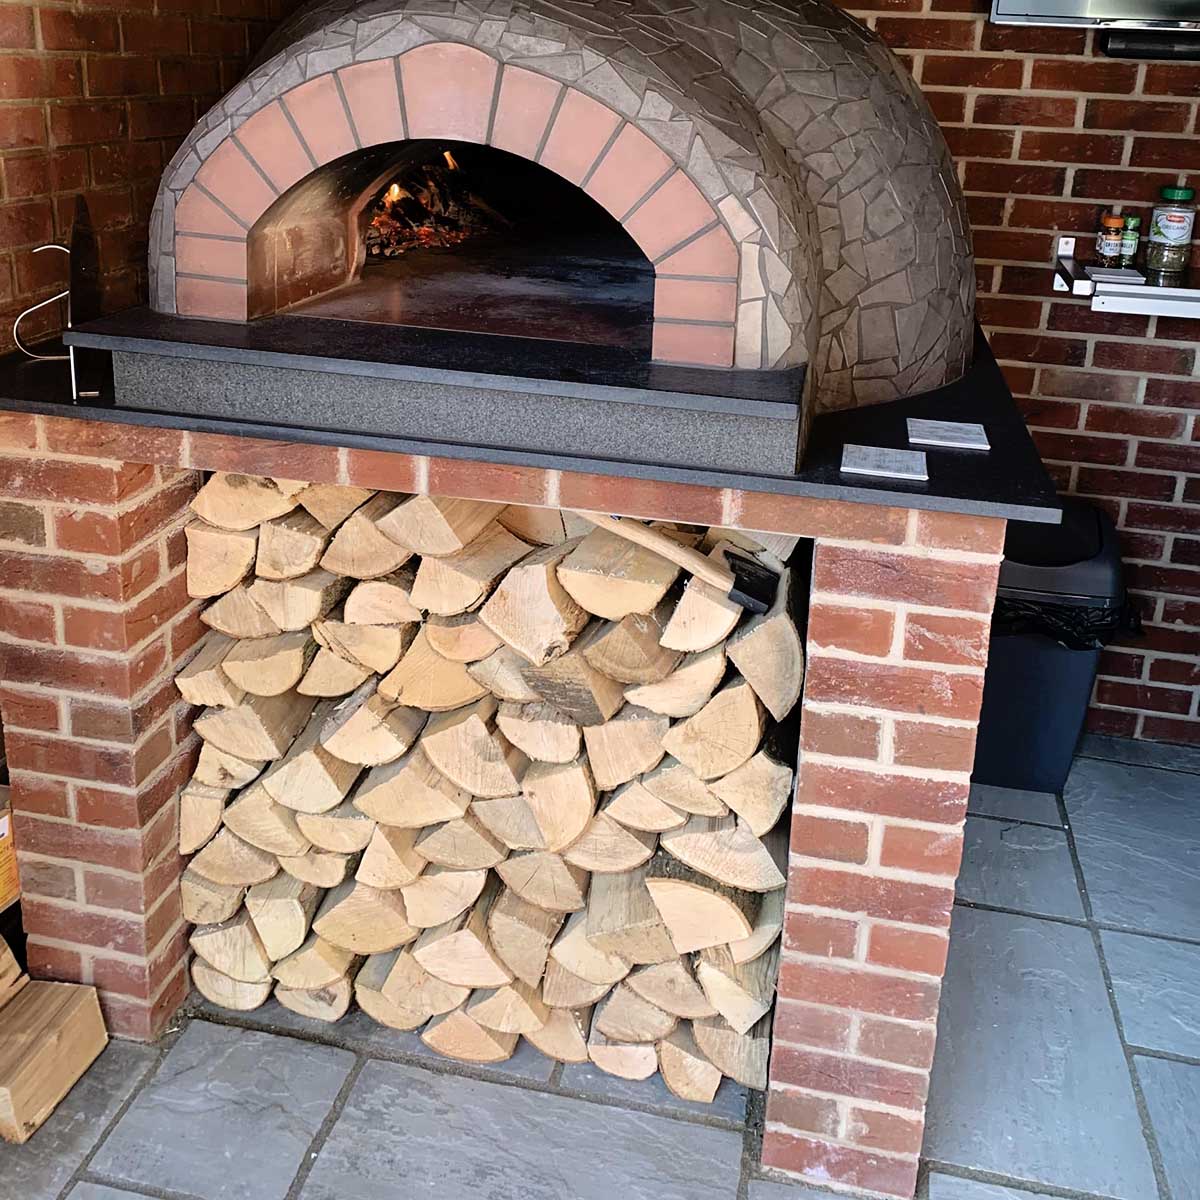 What Wood Do You Use For A Pizza Oven